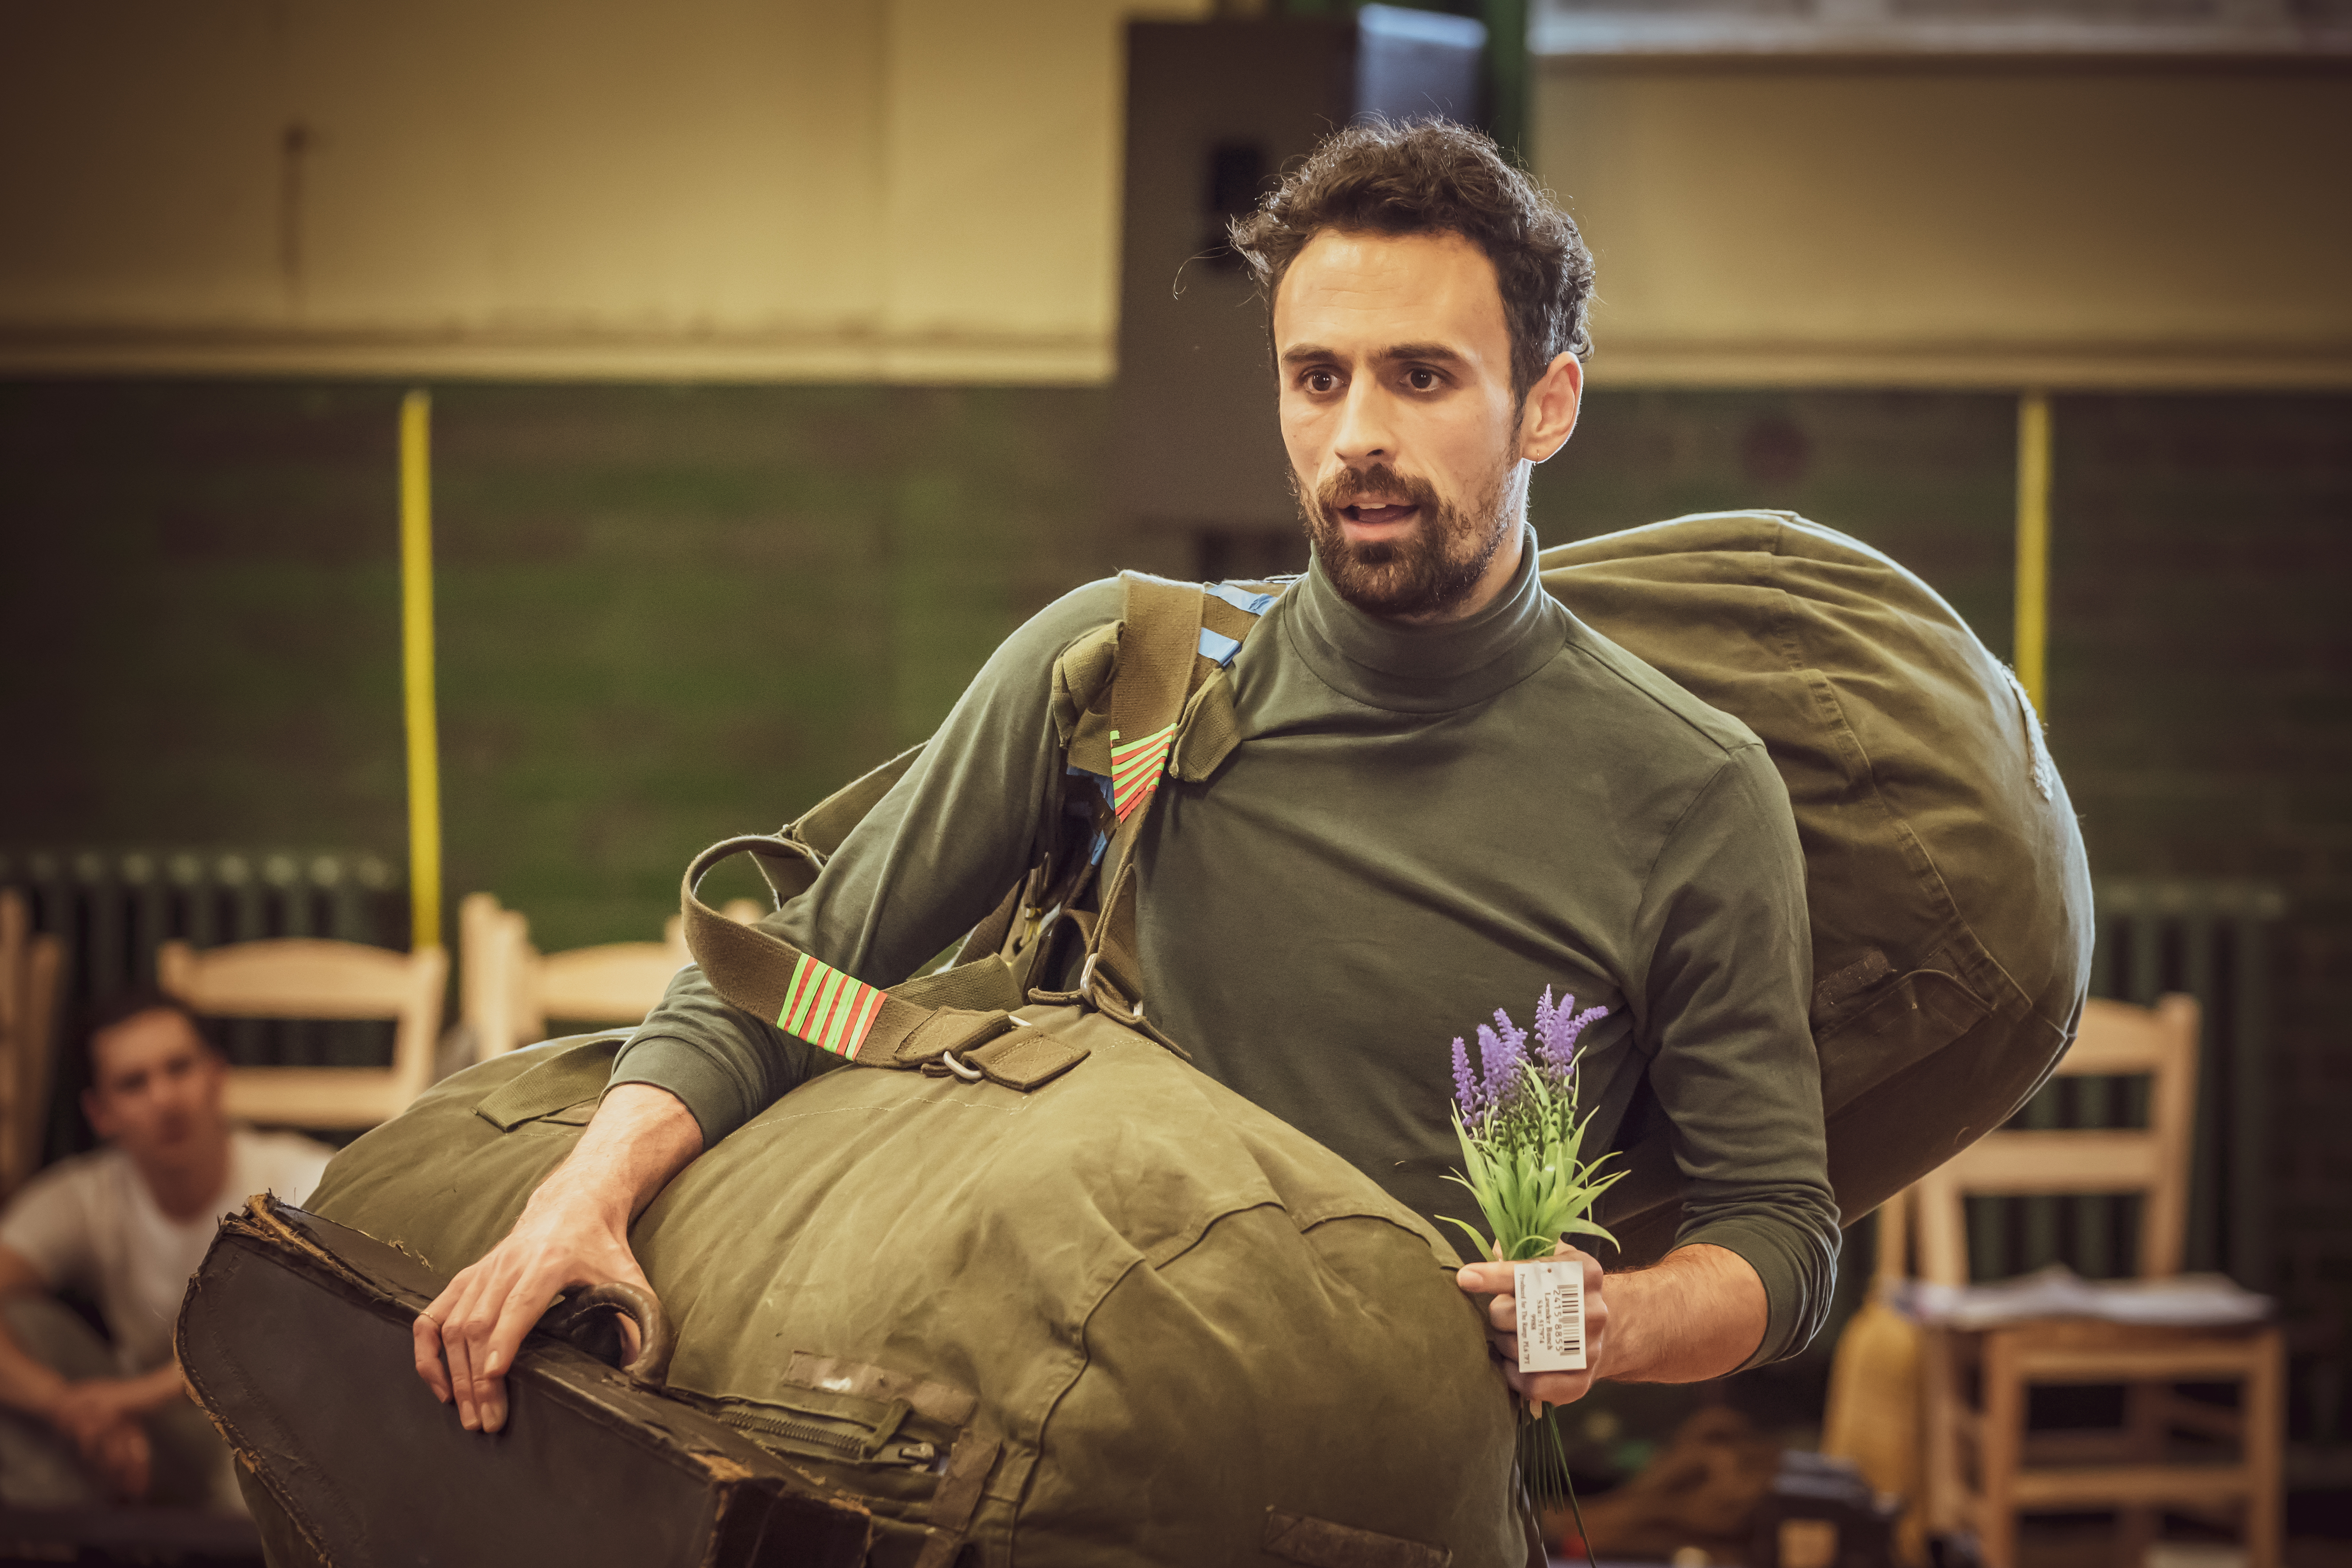 Male sitting down with arms wrapped around an army rucksack whilst starring with surprised facial expression